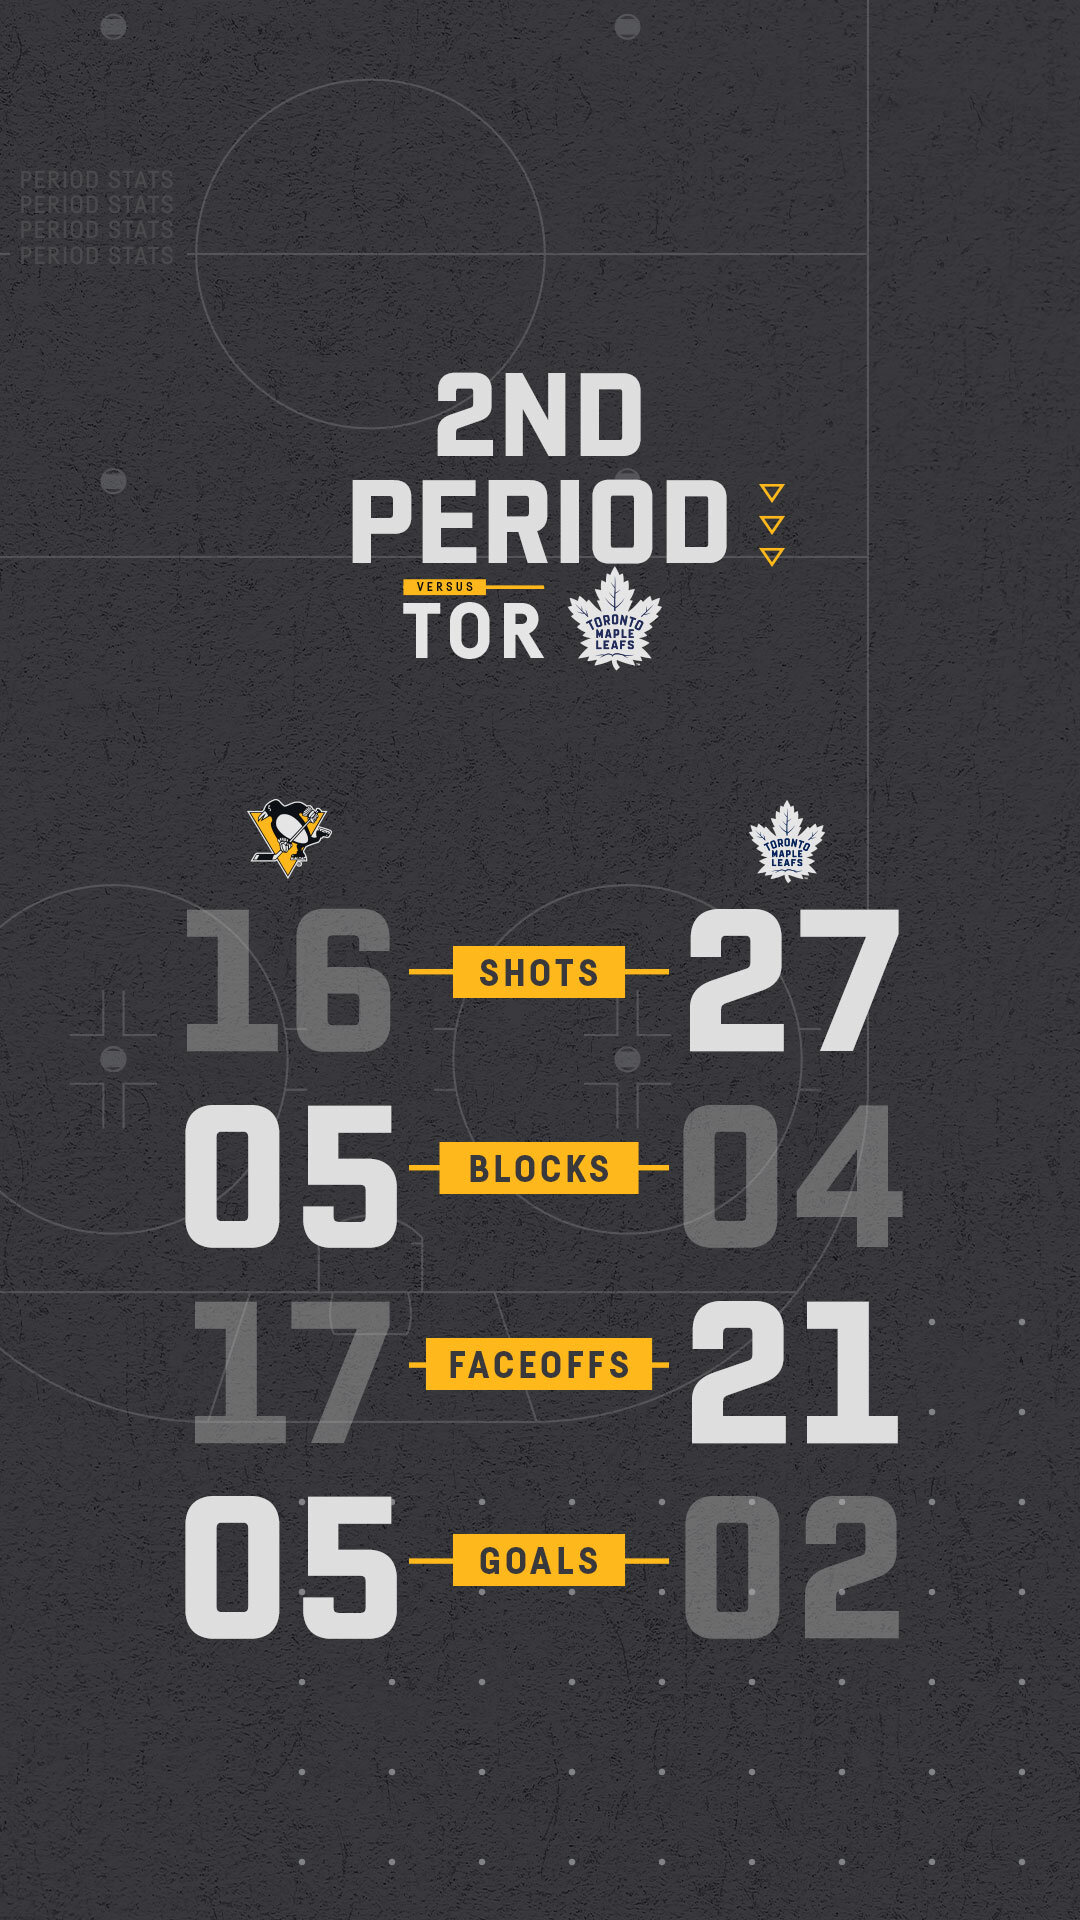 2nd Period Stats Graphic